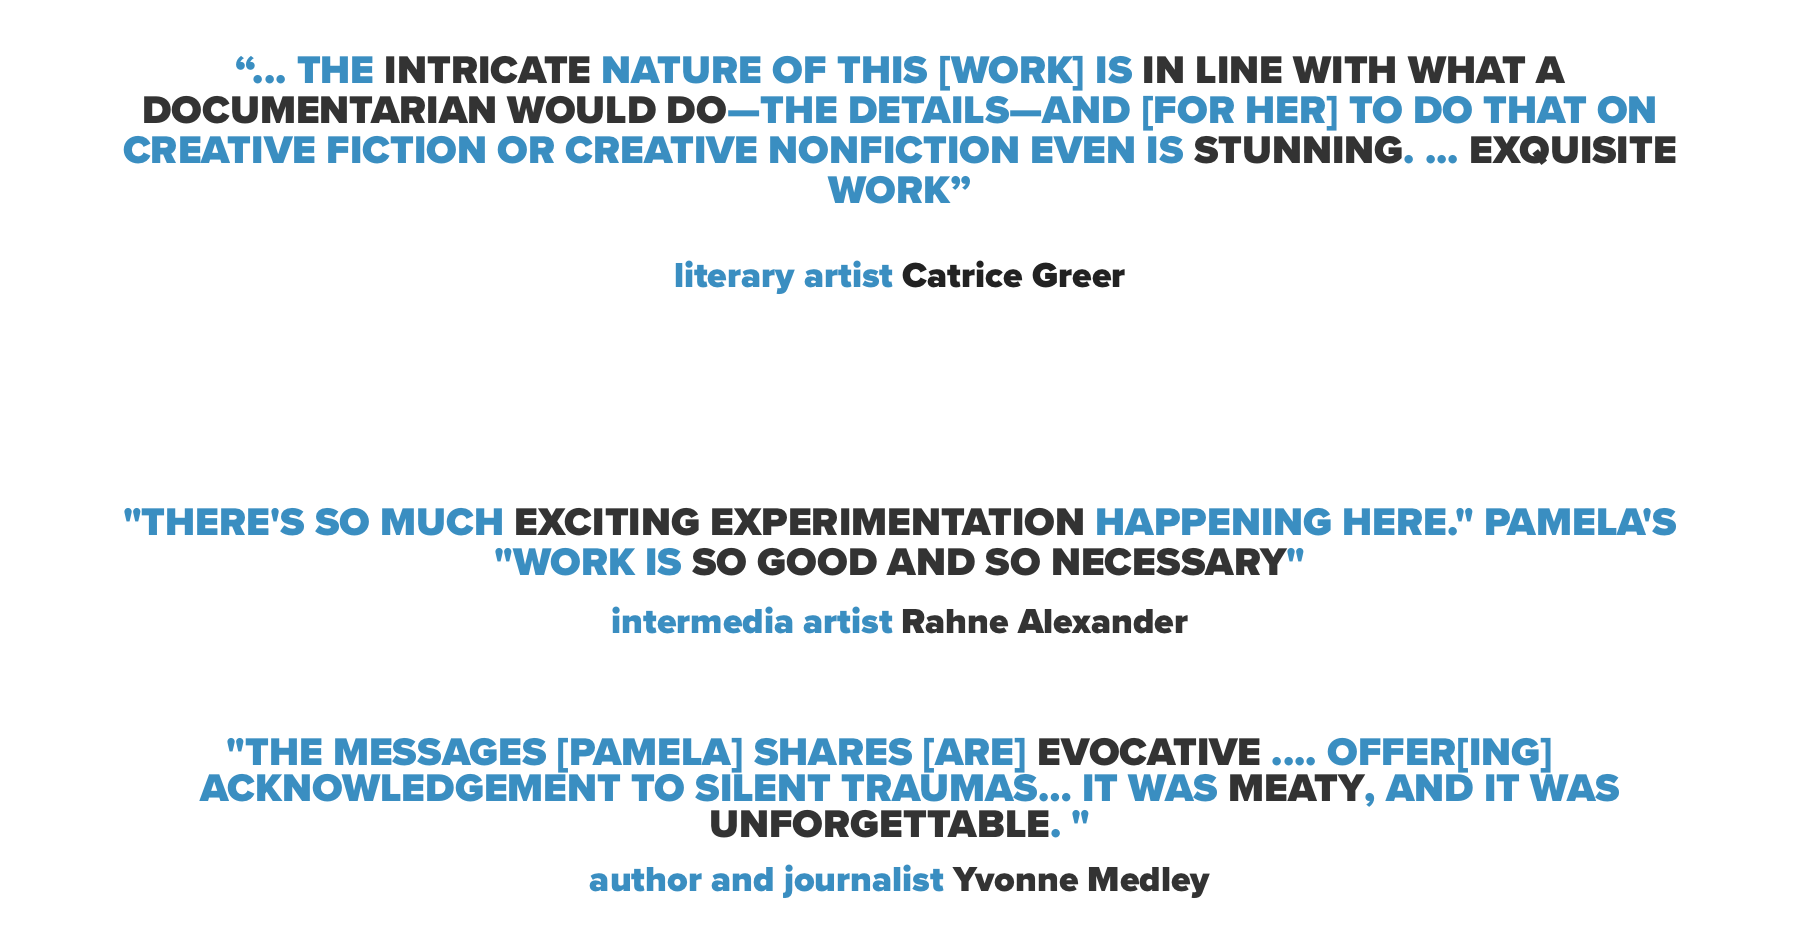 Quotes from noted figures and others praising Pamela Woolford's storytelling.